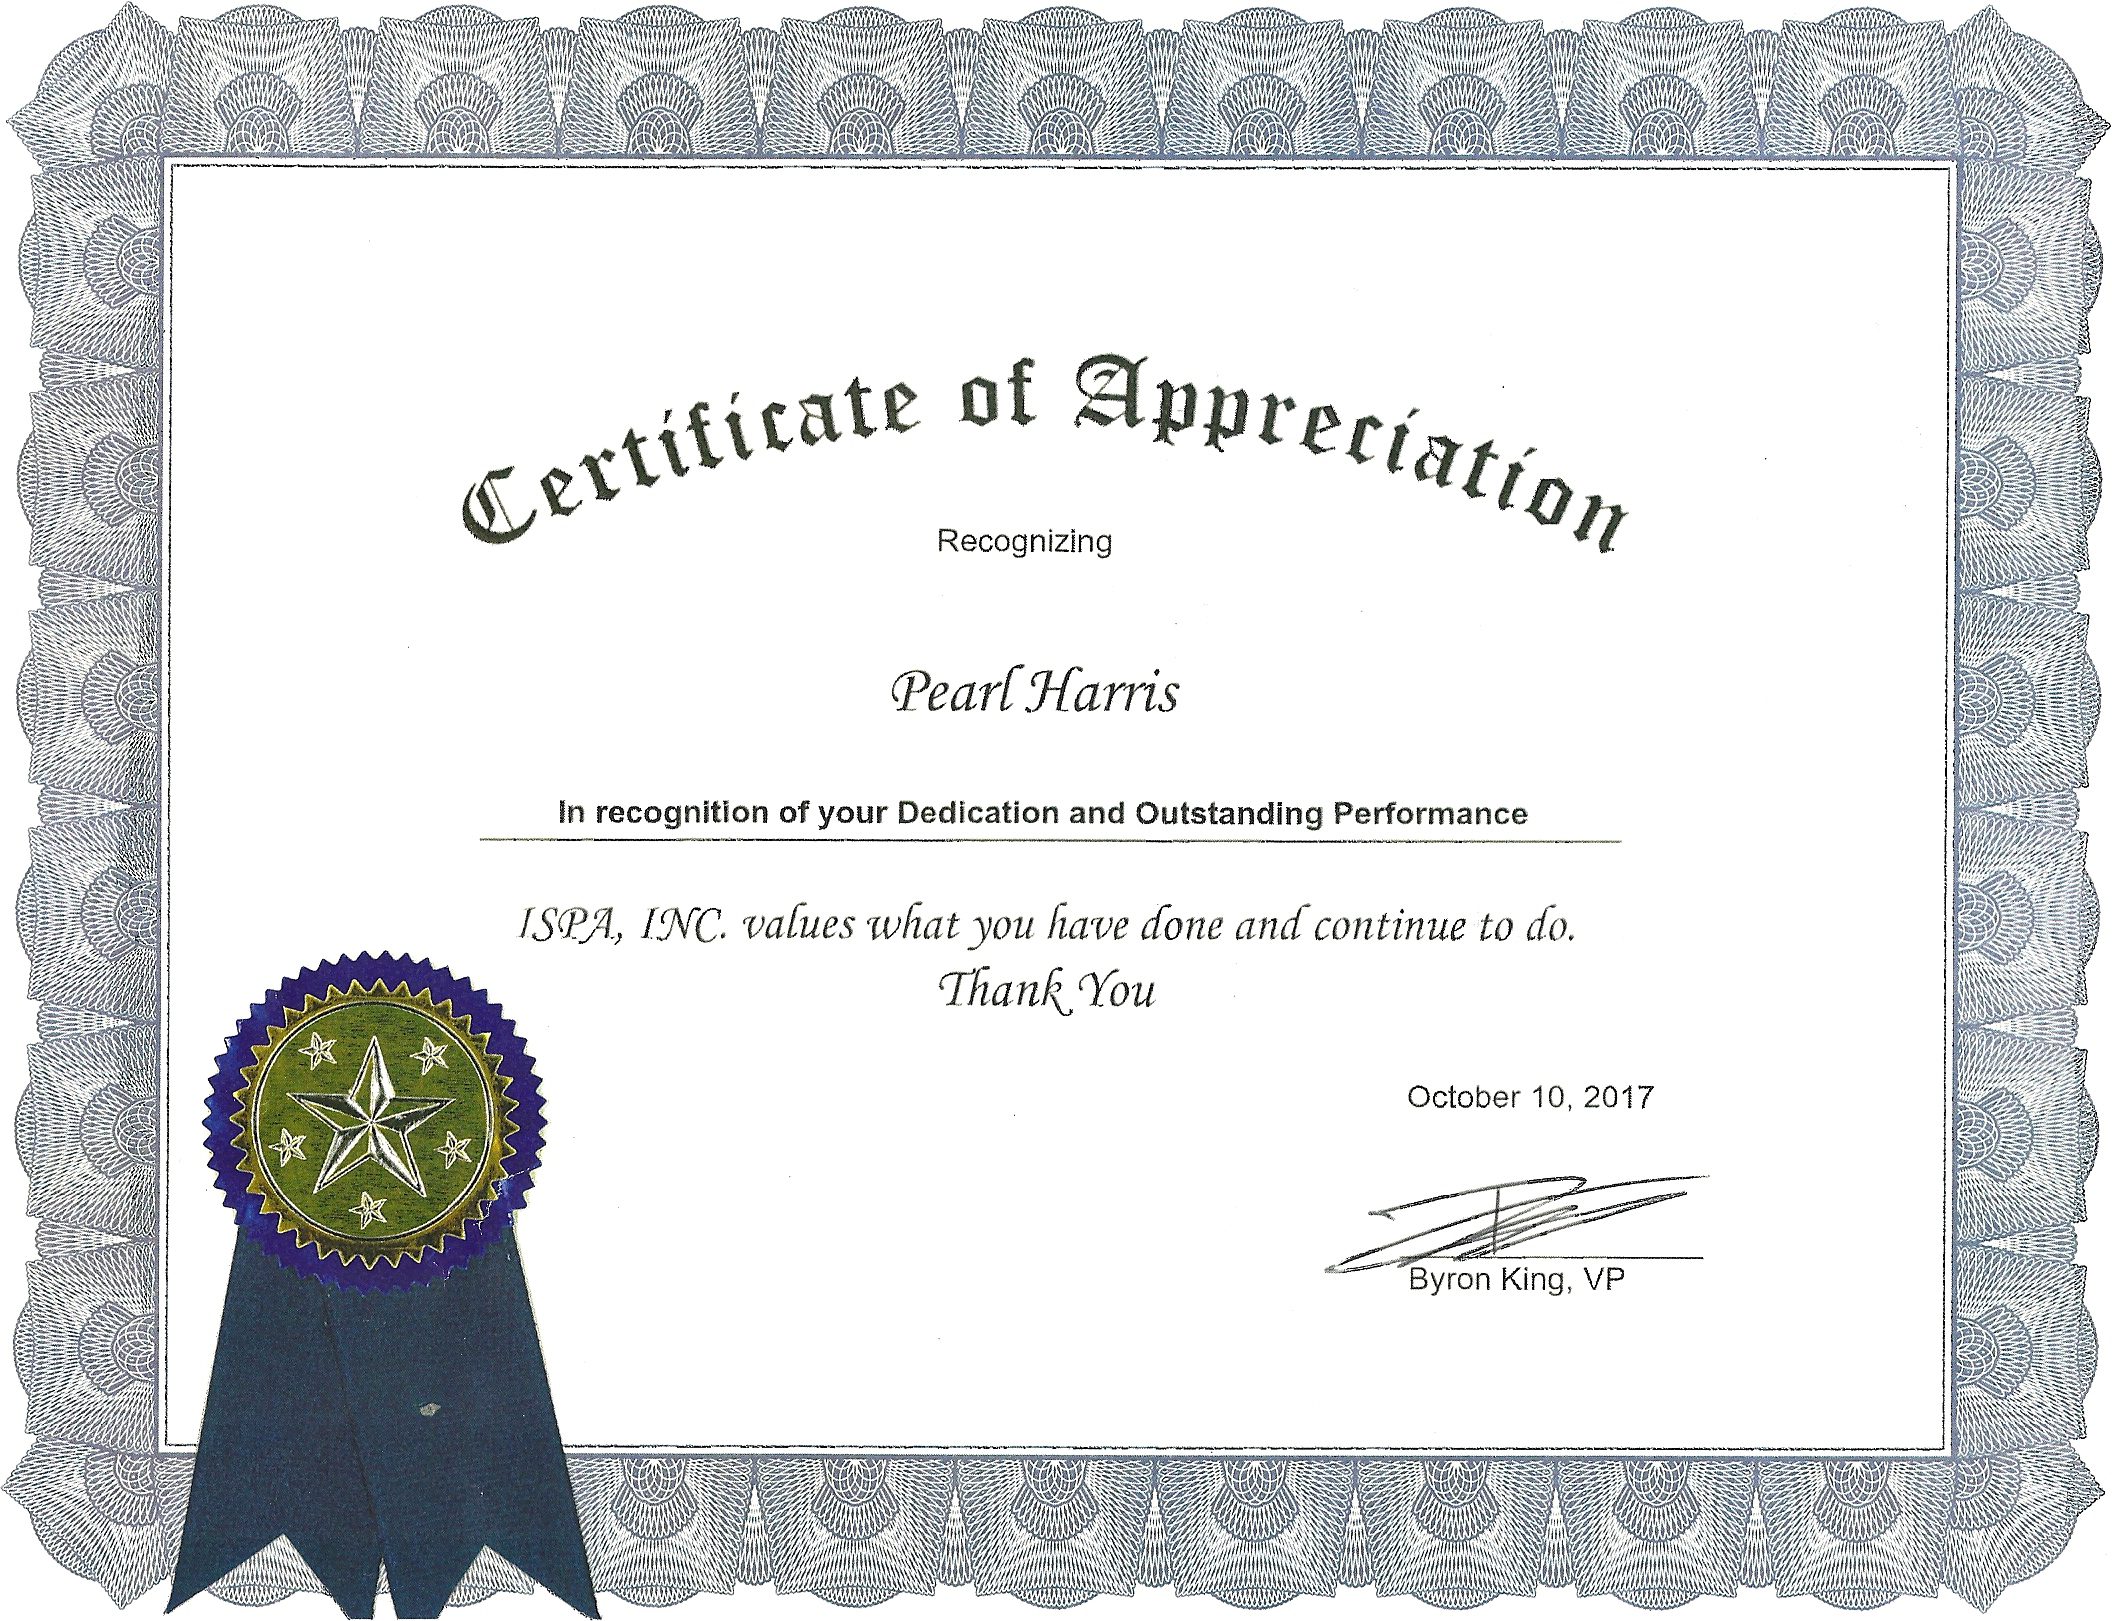 Certificate-of-Appreciation-for-Training-New-Employees